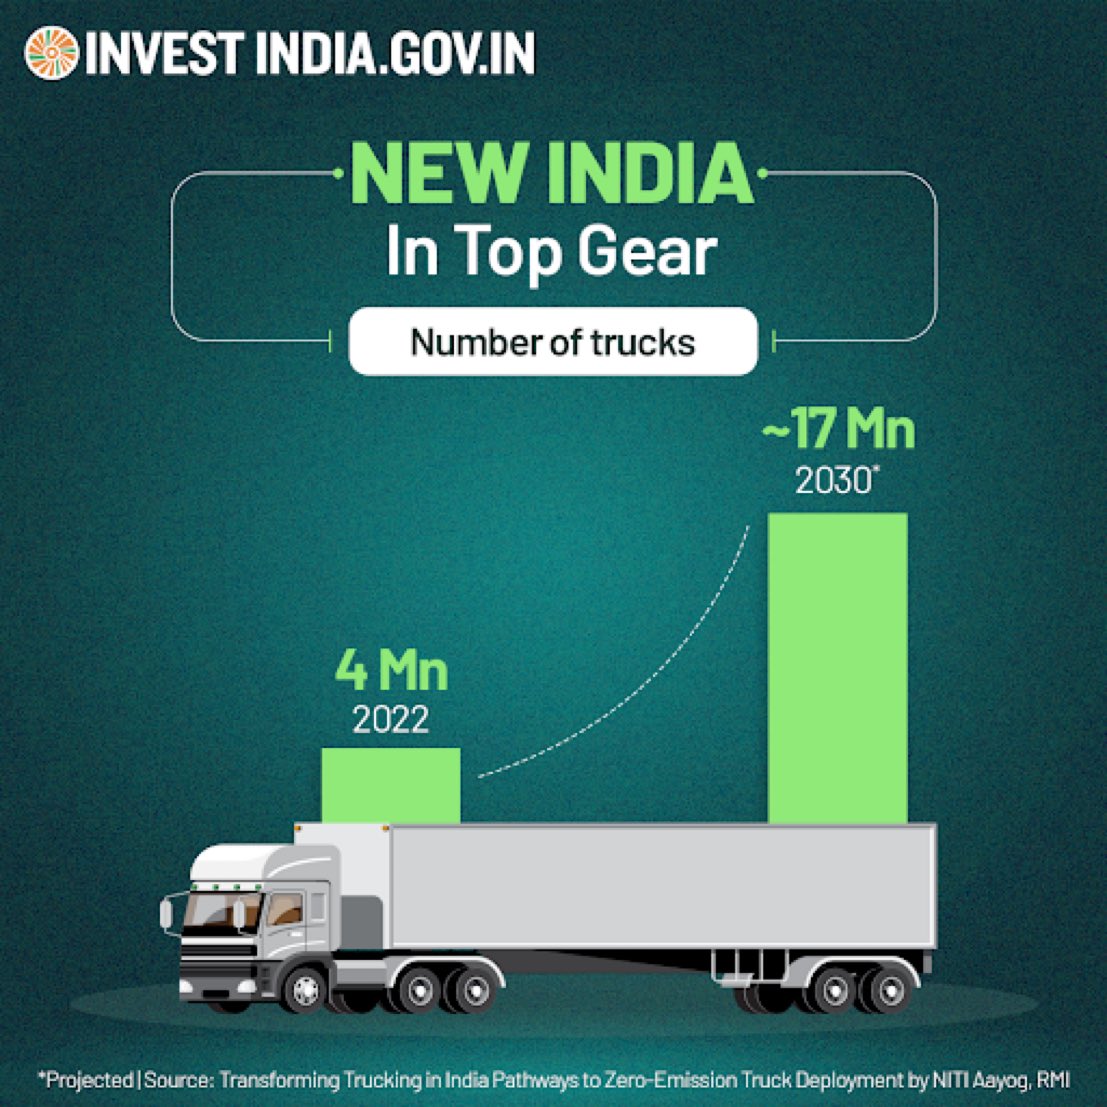 #GrowWithIndia
#NewIndia’s trucking market is projected to grow by over 4X by 2050.

Explore #NIP opportunities across sectors on #IIG at bit.ly/Automotive_IIG